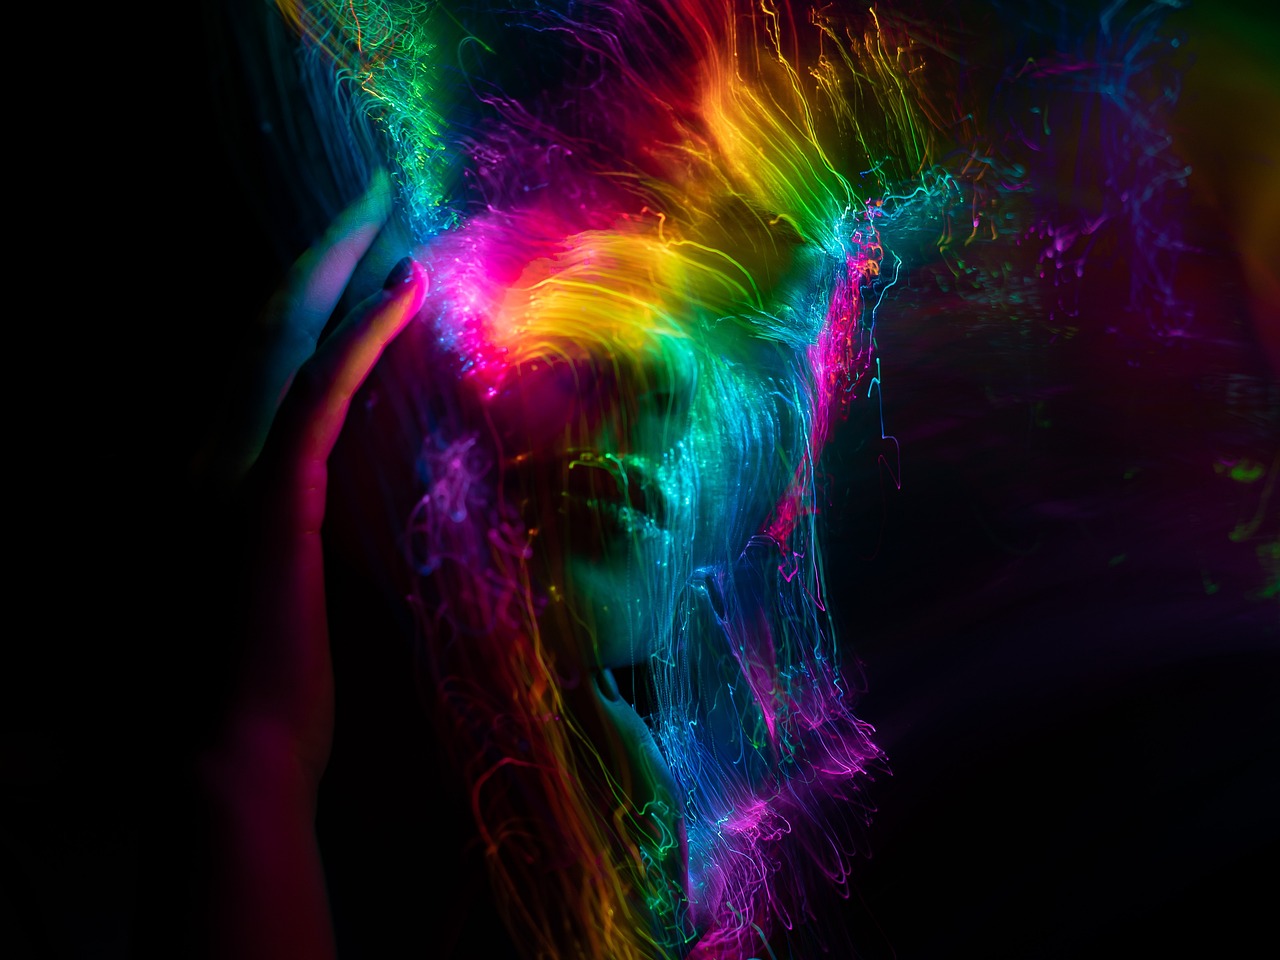 a close up of a person holding a cell phone, inspired by Gabriel Dawe, digital art, electrified hair, splashes of neon, dark rainbow, woman portrait made out of paint